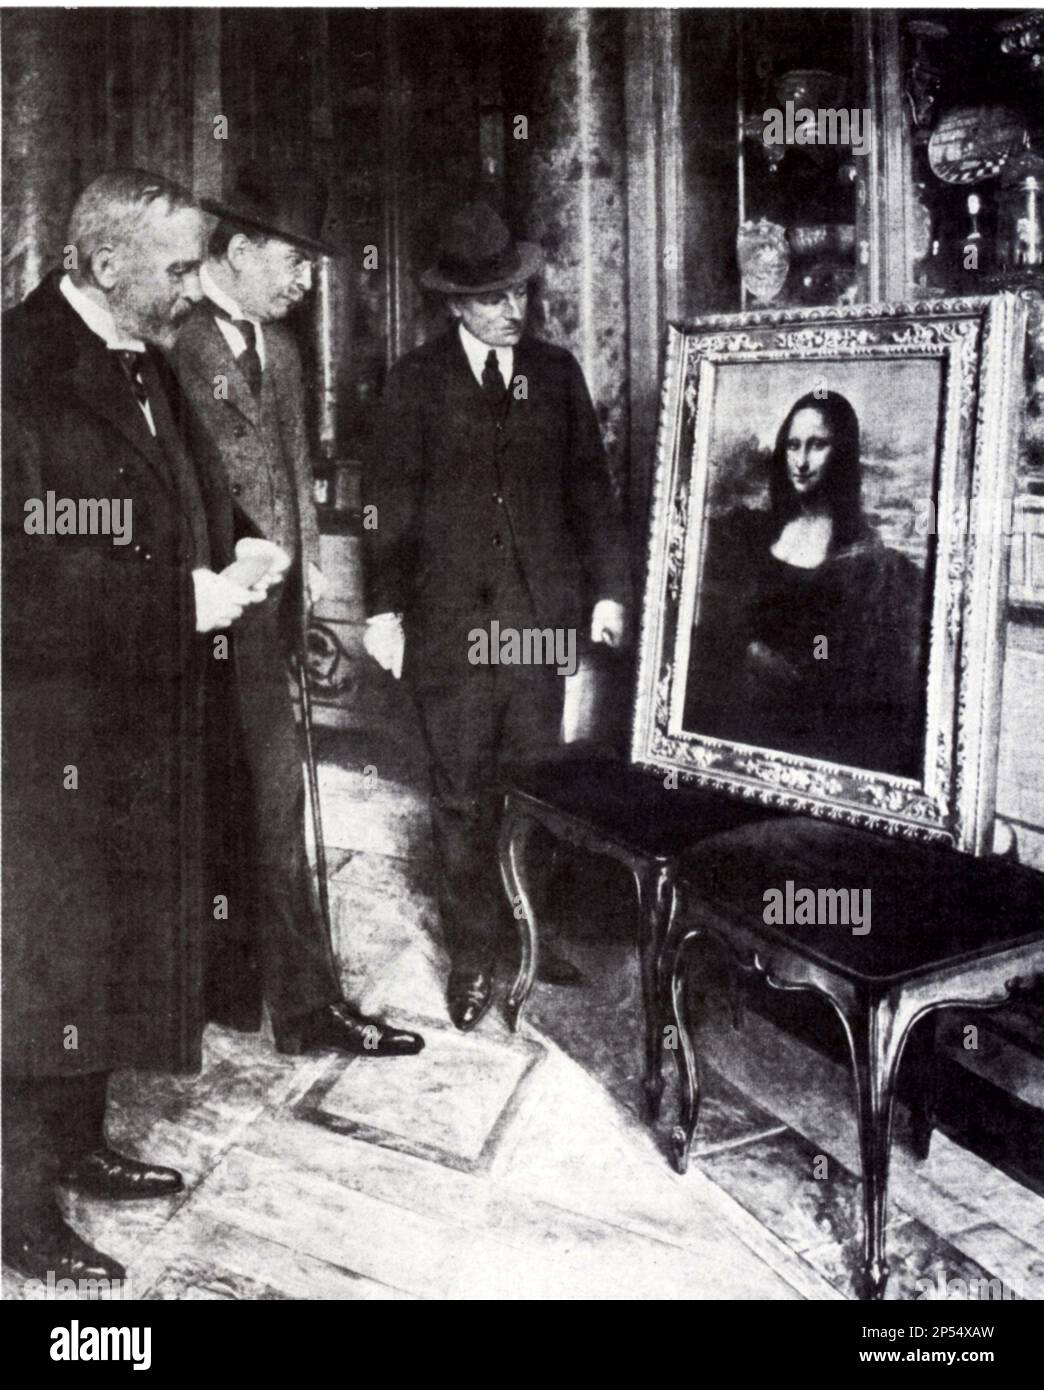 1913 , Firenze , Italy : The celebrated painting  La GIOCONDA by LEONARDO DA VINCI exibited at UFFIZI Galleries after was found in Florence. Robbed the 21 august 1911 from the Louvre in Paris , France , by the italian patriotic housepainter  Vincenzo Perugia ( Peruggia ) . In this photo the painter LUIGI CAVENAGHI ( 1844 - 1918 , restorer in Milano of Cenacolo by Leonardo in Santa Maria delle Grazie ), CORRADO RICCI ( director of italian Belle Arti office ) and the professor Doctor GIOVANNI  POGGI ( director of Uffizi Gallery ) - FURTO - foto storiche - history - ladro - thief - museo ----  Ar Stock Photo